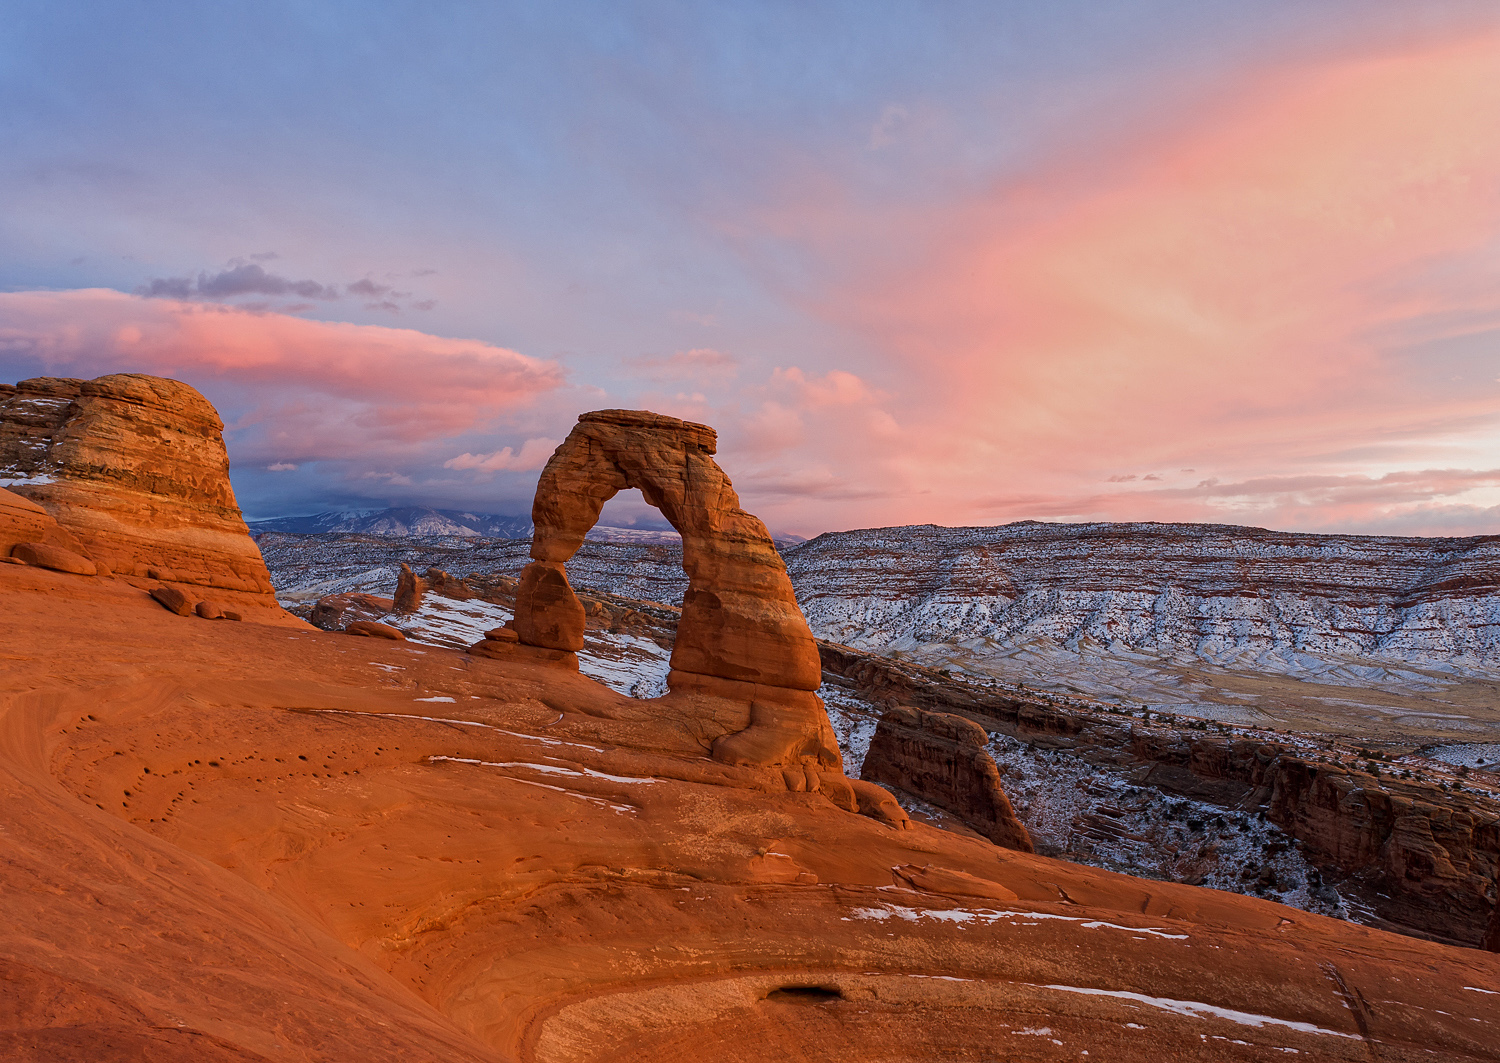 A colorful winter sunset ends a beautiful day at Delicate Arch in Arches National Park, Utah.